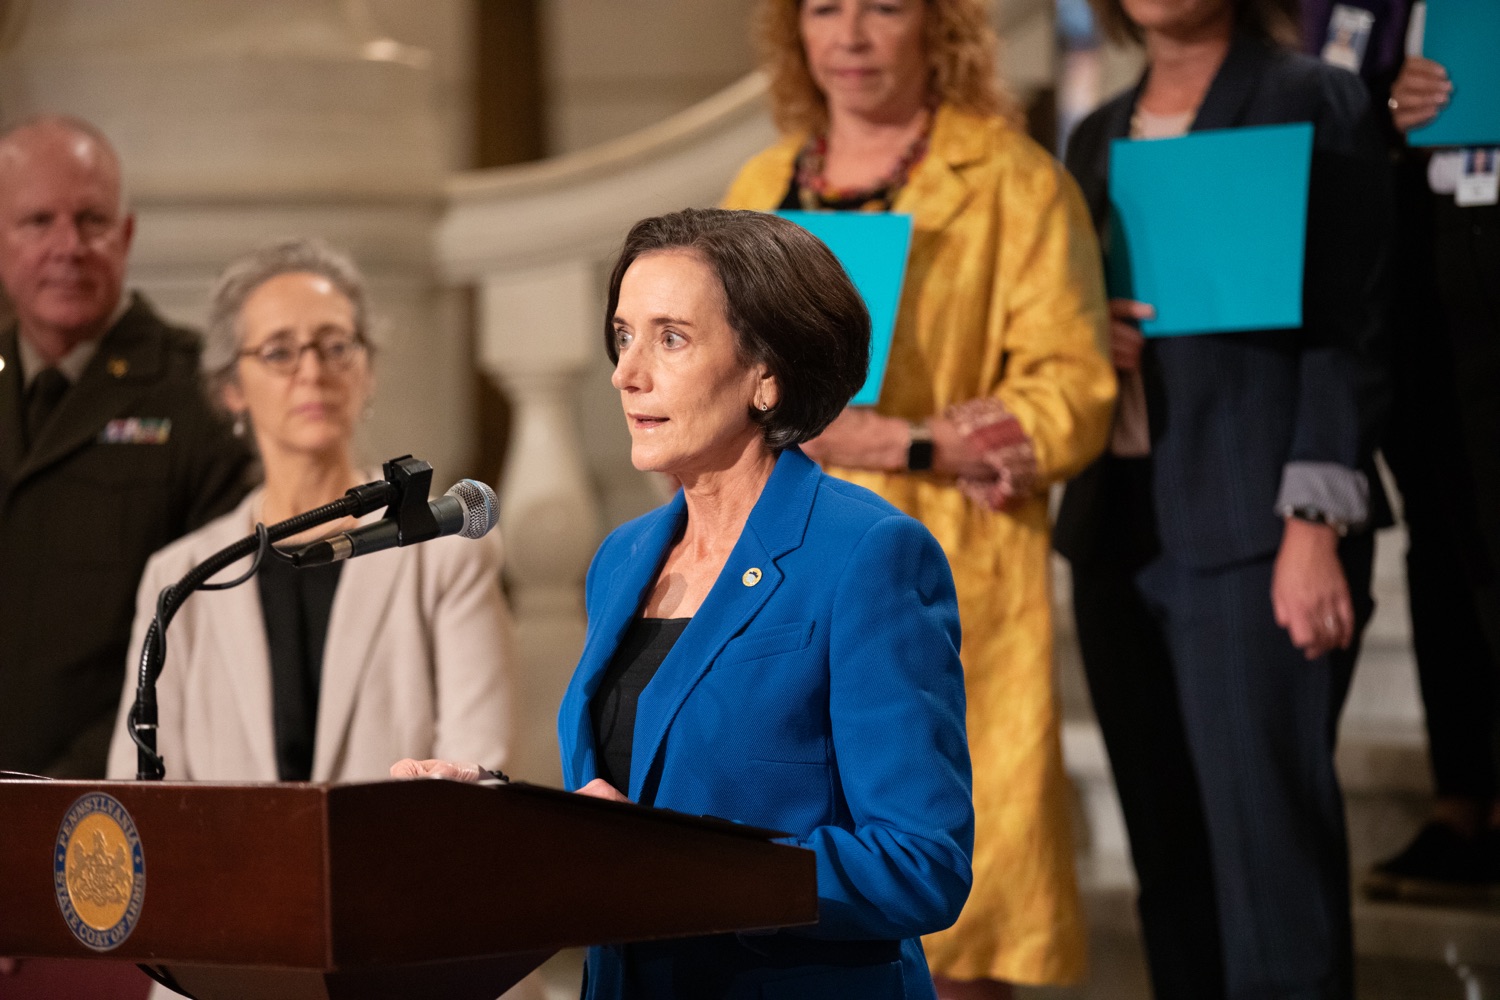 DHS Secretary Dr. Val Arkoosh speaks at Pennsylvanias Suicide Prevention Month Press Conference at the State Capital in Harrisburg, PA.<br><a href="https://filesource.amperwave.net/commonwealthofpa/photo/23696_dhs_suicidePrevention-3.jpg" target="_blank">⇣ Download Photo</a>